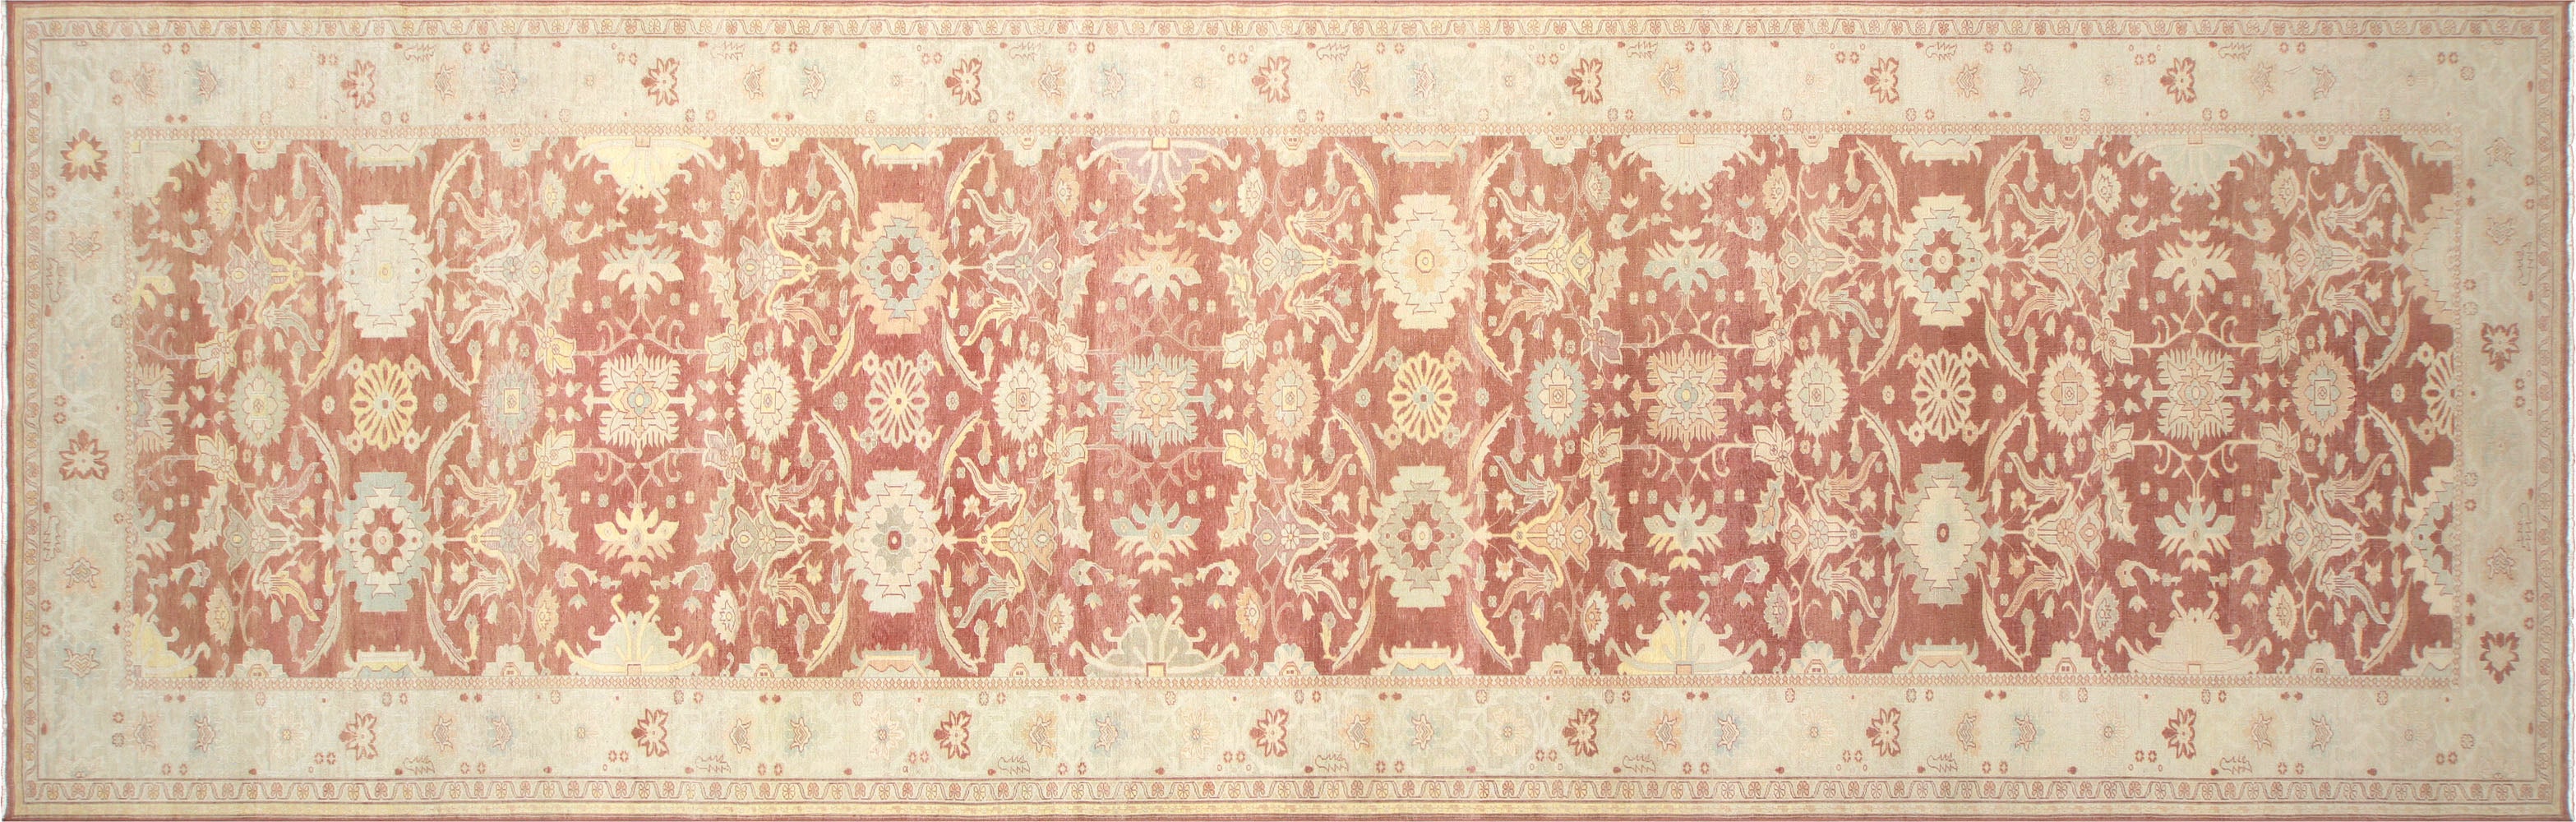 Recently Woven Egyptian Sultanabad Carpet - 7'5" x 23'6"